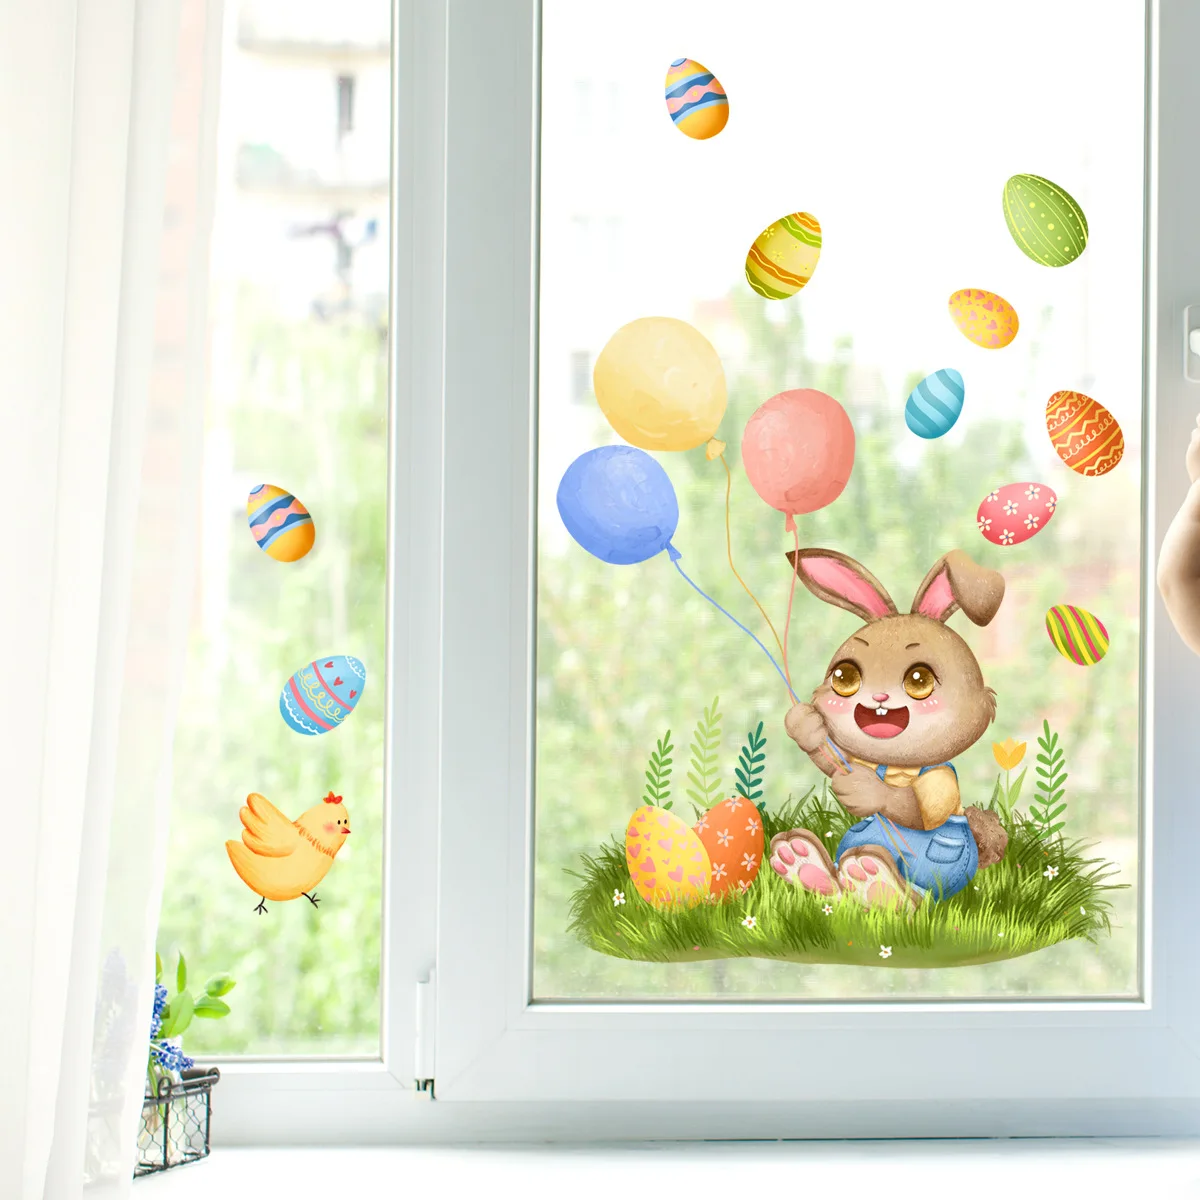 30*60cm Rabbit Balloon Egg Easter Cartoon Wall Sticker Living Room Bedroom Study Restaurant Window Room Decorative Wall Sticker independence day little boy sticker diy window bedroom study living room background decor scene wall static stickers 45 60cm